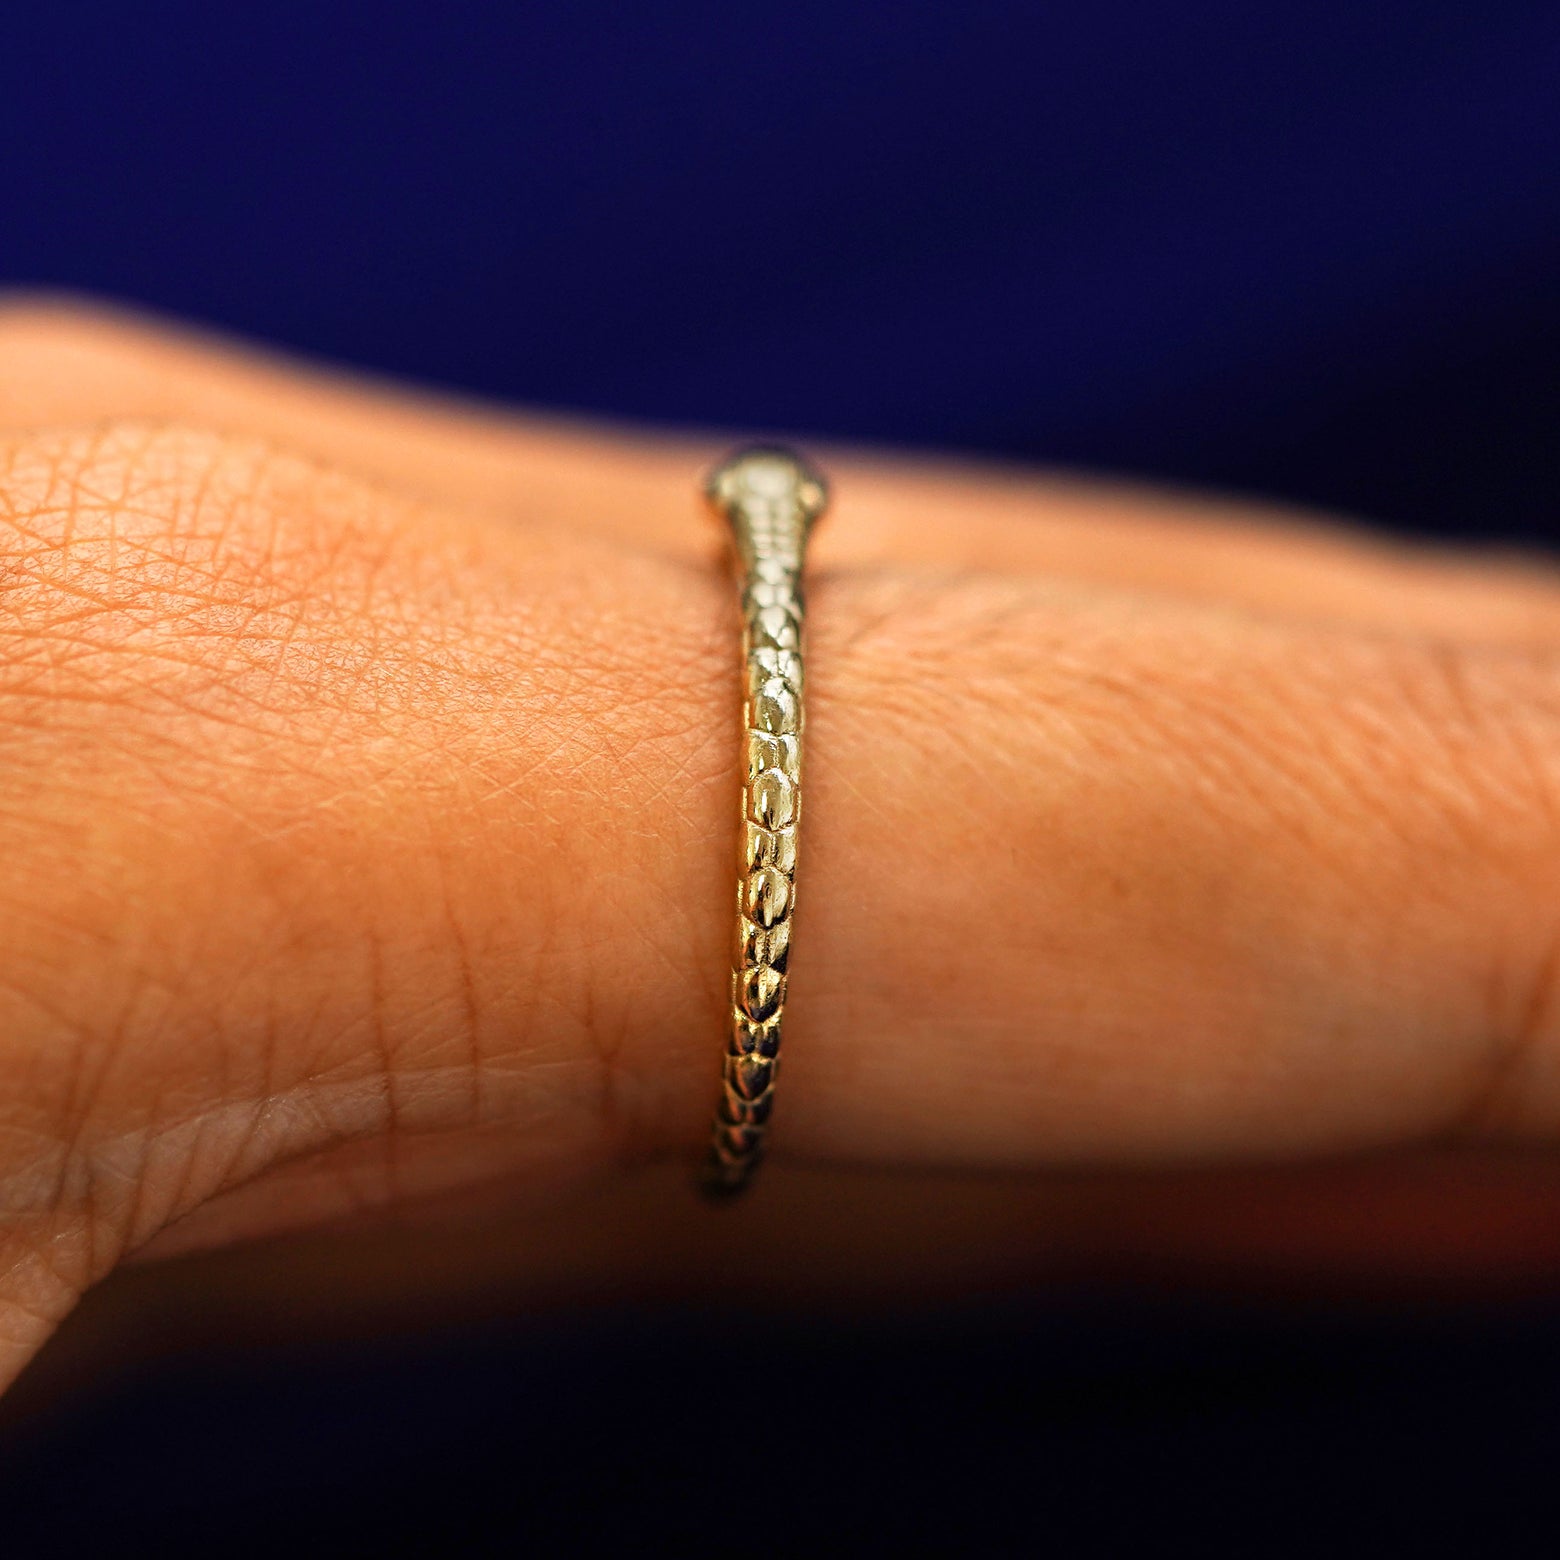 Alternate Side view of an Ouroboros Snake Ring on a model's finger showing the back of the snake's head 